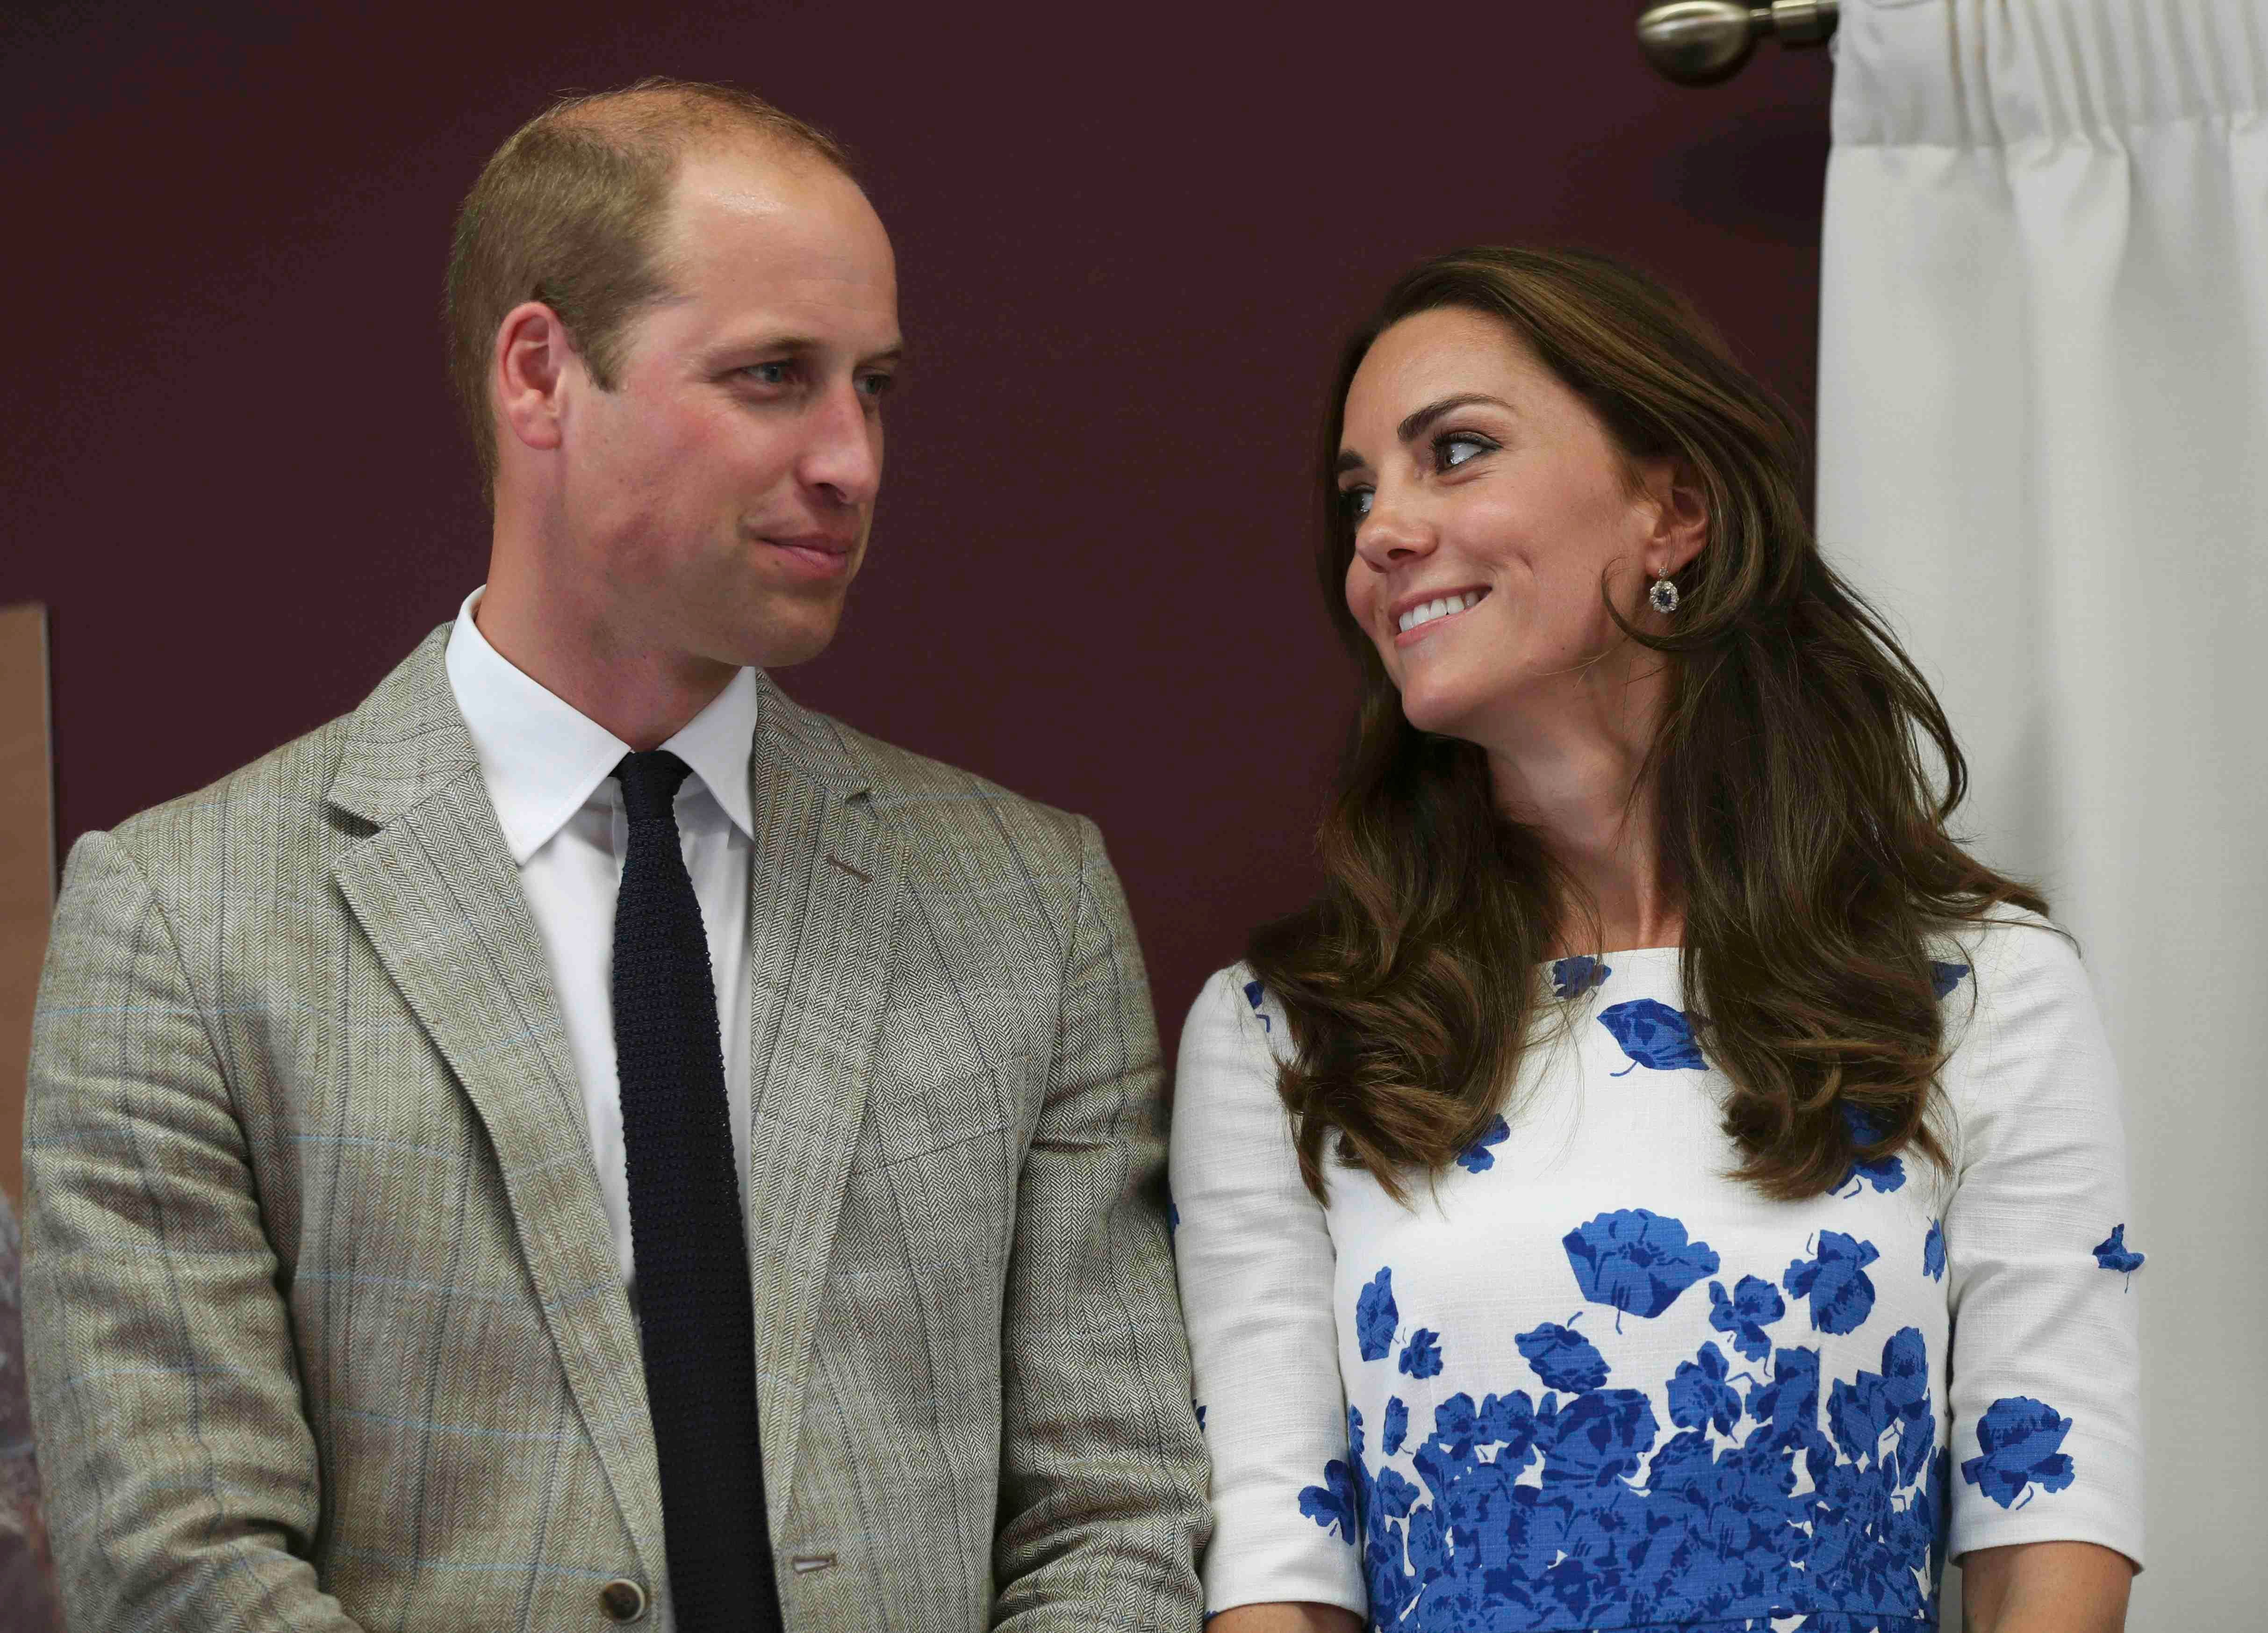 Catherine, Duchess of Cambridge and Prince William, Duke of Cambridge listen to a speech at their visit to Keech Hospice Care on August 24, 2016 | Photo: Getty Images